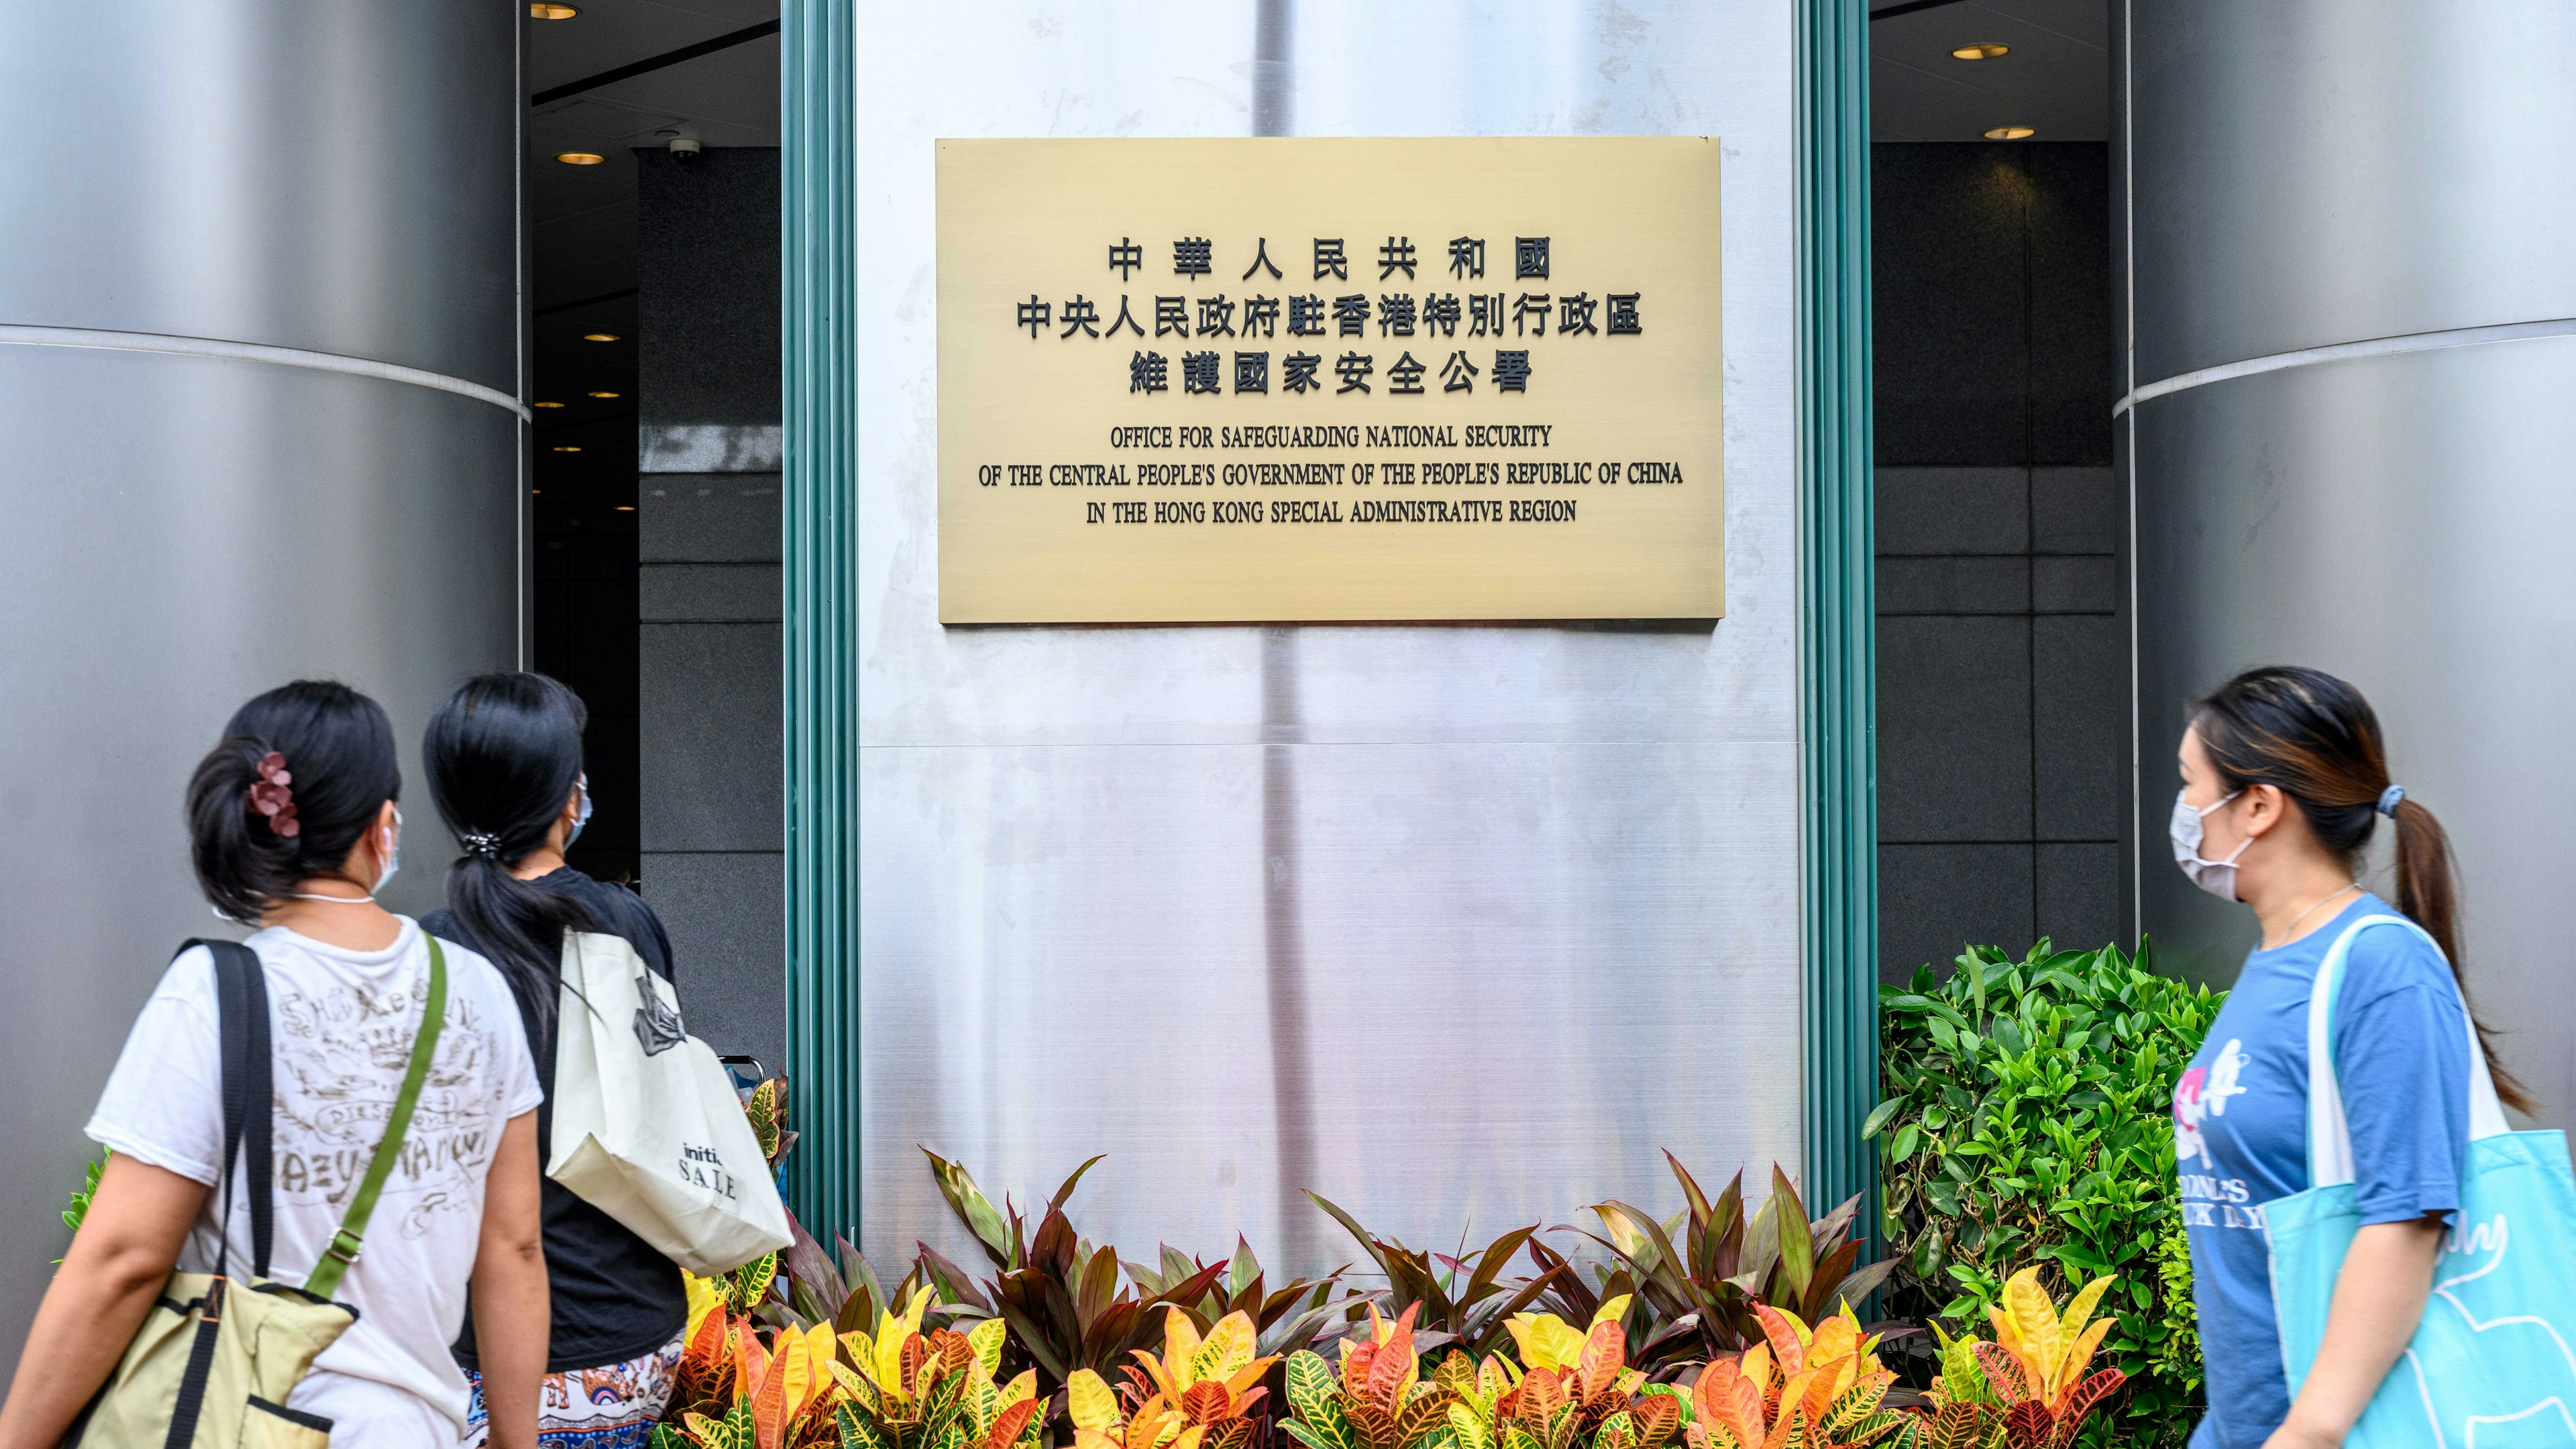 Pedestrians walk past a plaque outside the Office for Safeguarding National Security of the Central People's Government in the Hong Kong Special Administrative Region after its official inauguration in Hong Kong on July 8, 2020.